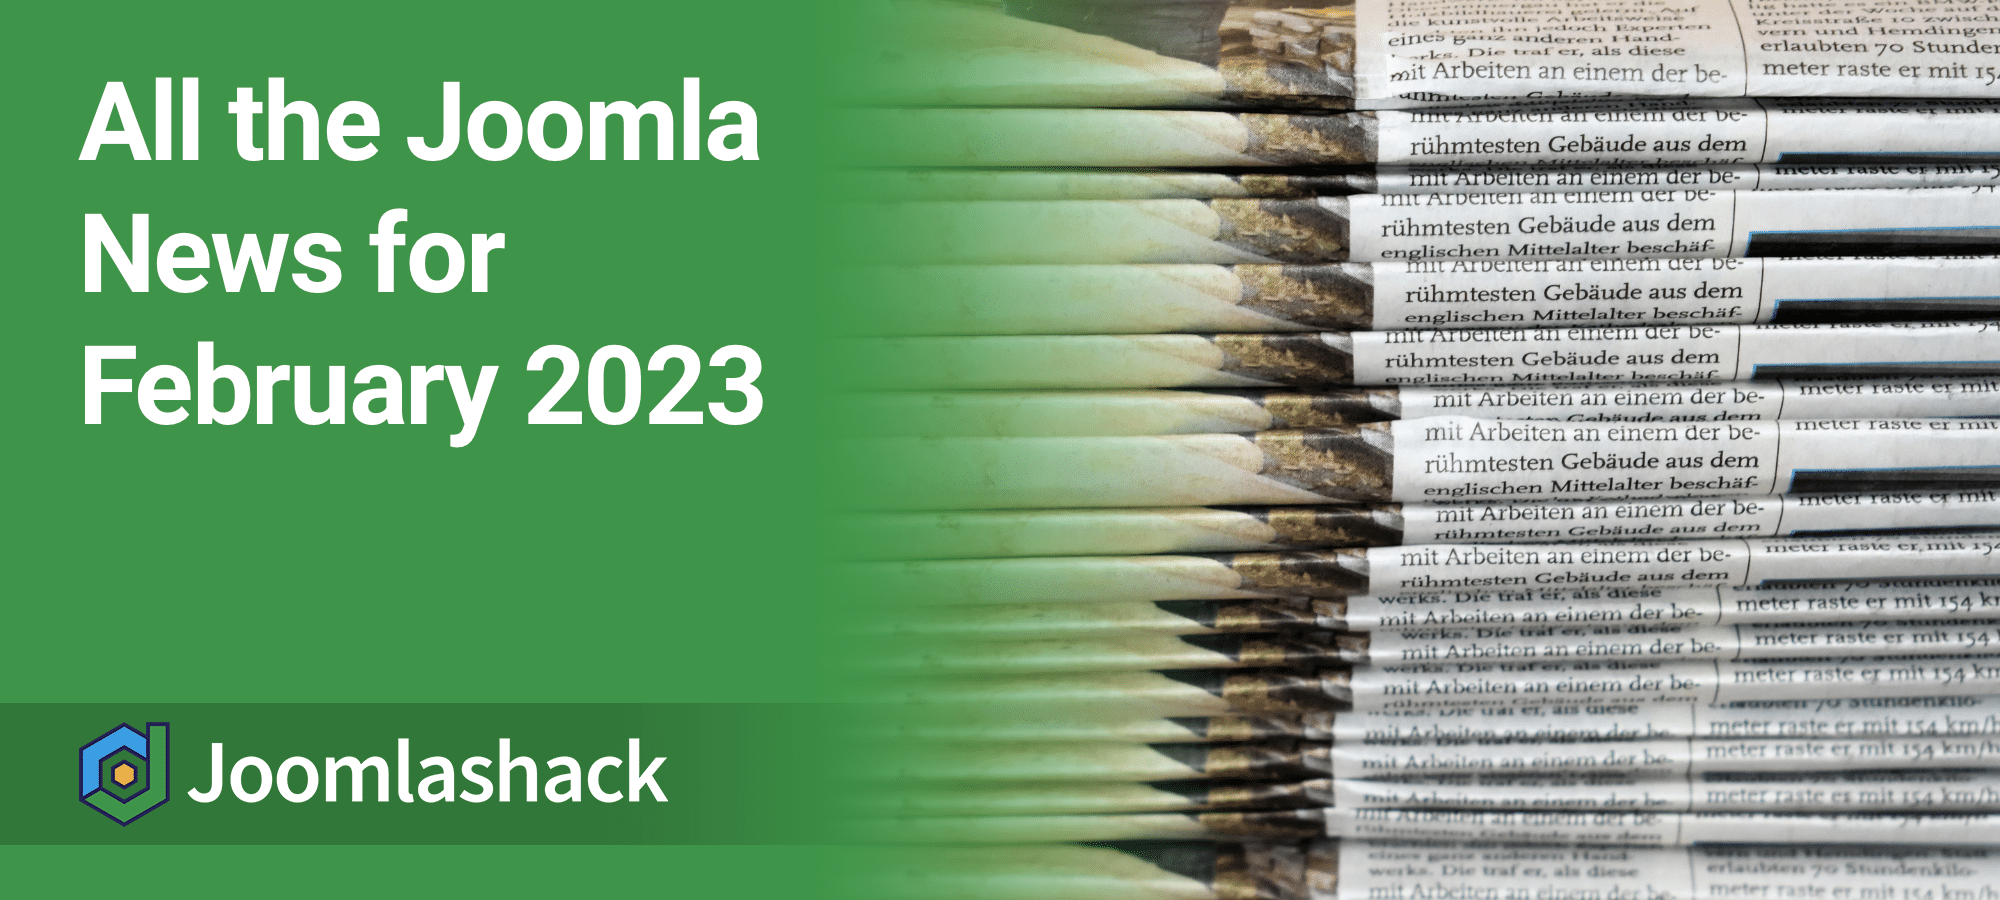 All the Joomla News for February 2023